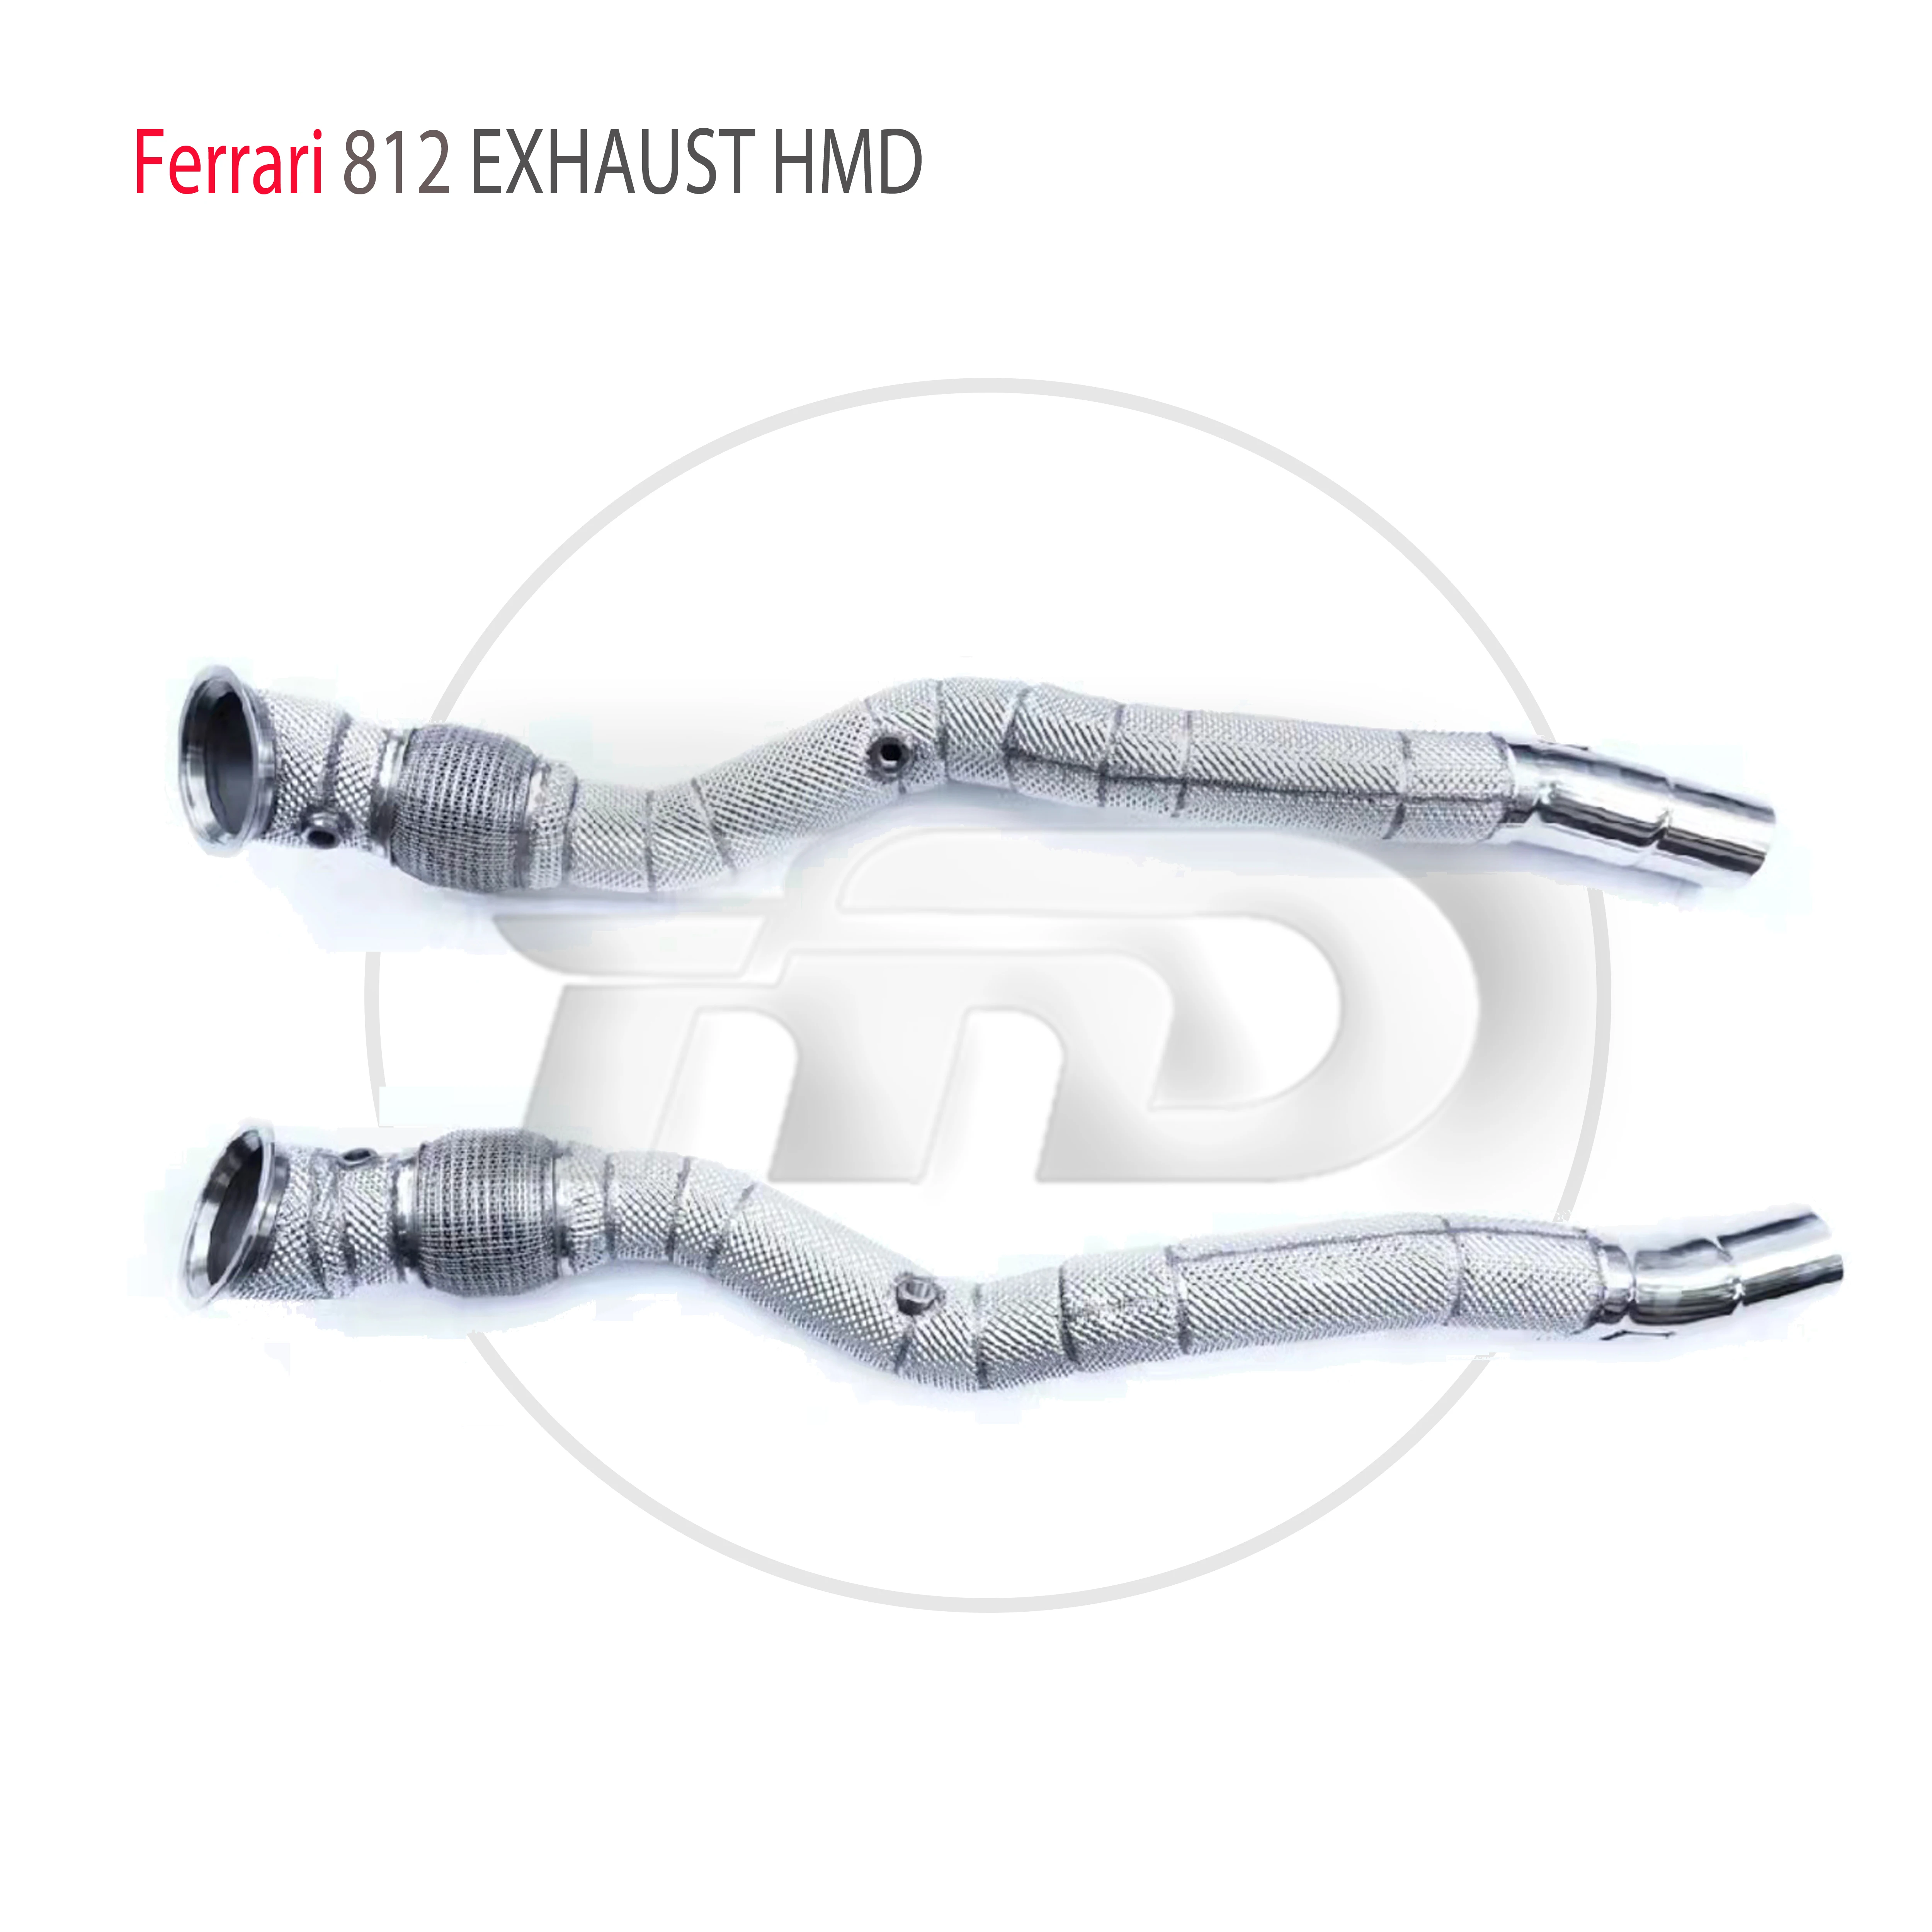 

HMD Stainless Steel Exhaust System High Flow Performance Downpipe for Ferrari 812 Car Accessories